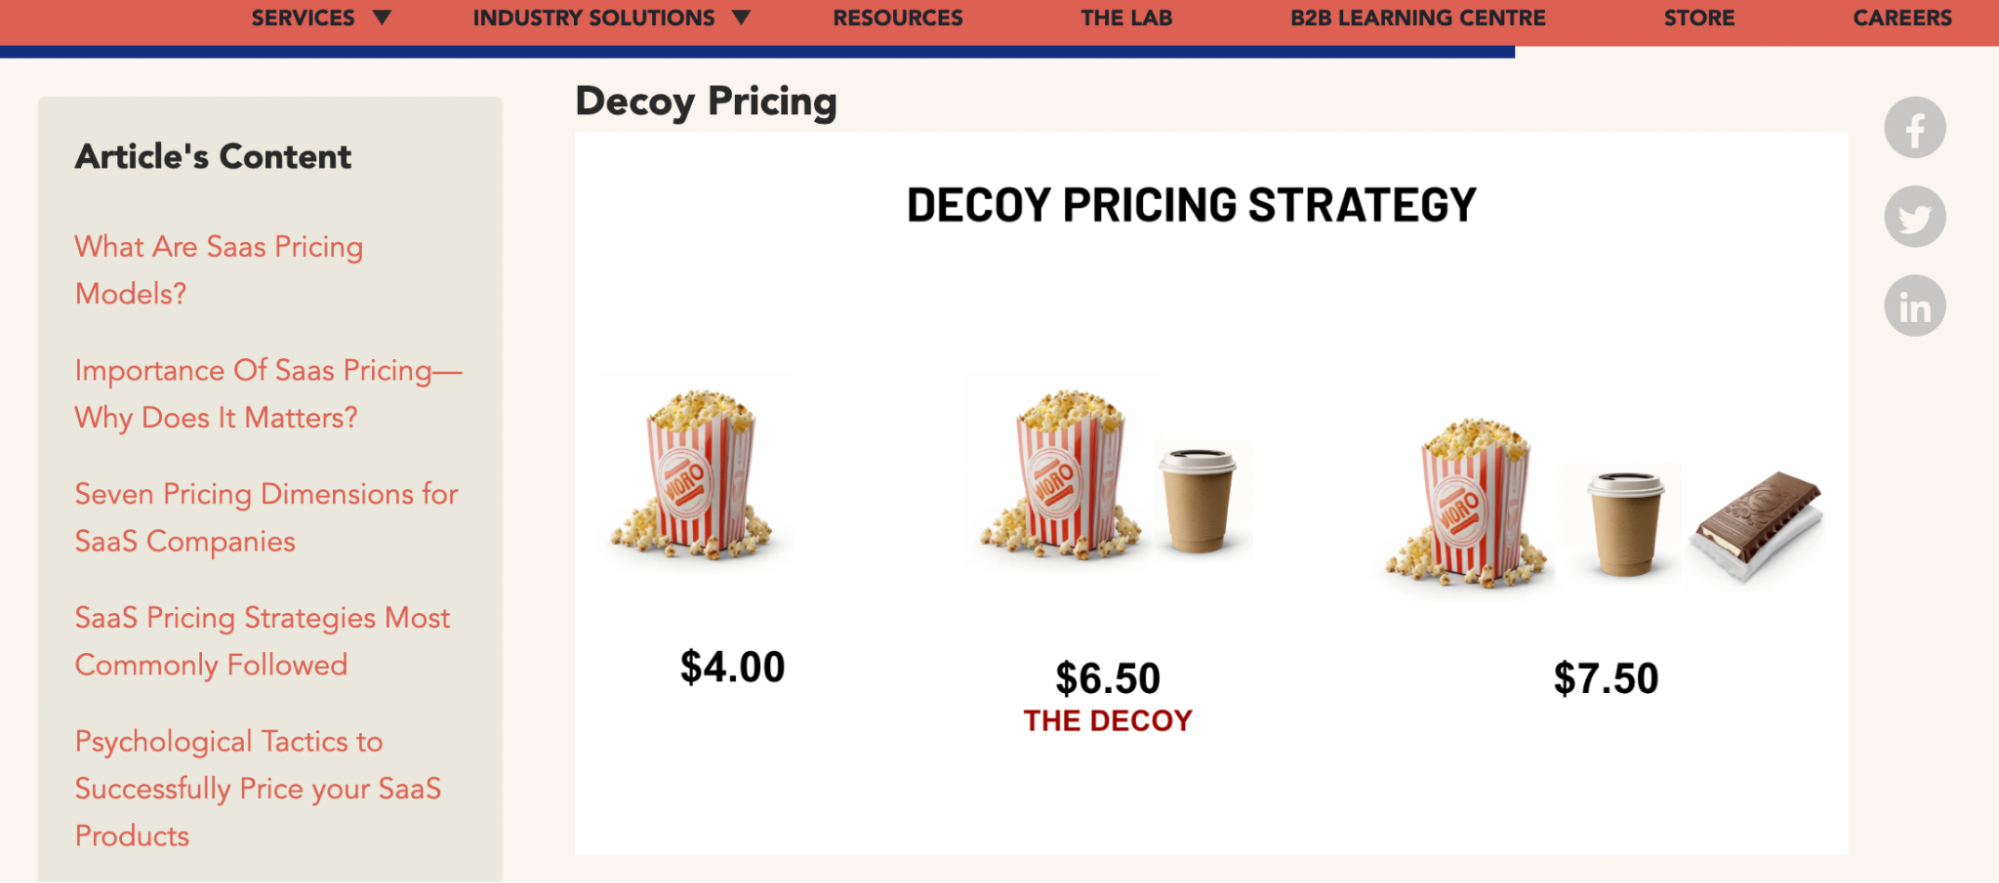 Image depicting a decoy pricing strategy for popcorn, popcorn and coffee, and popcorn, coffee, and a chocolate bar